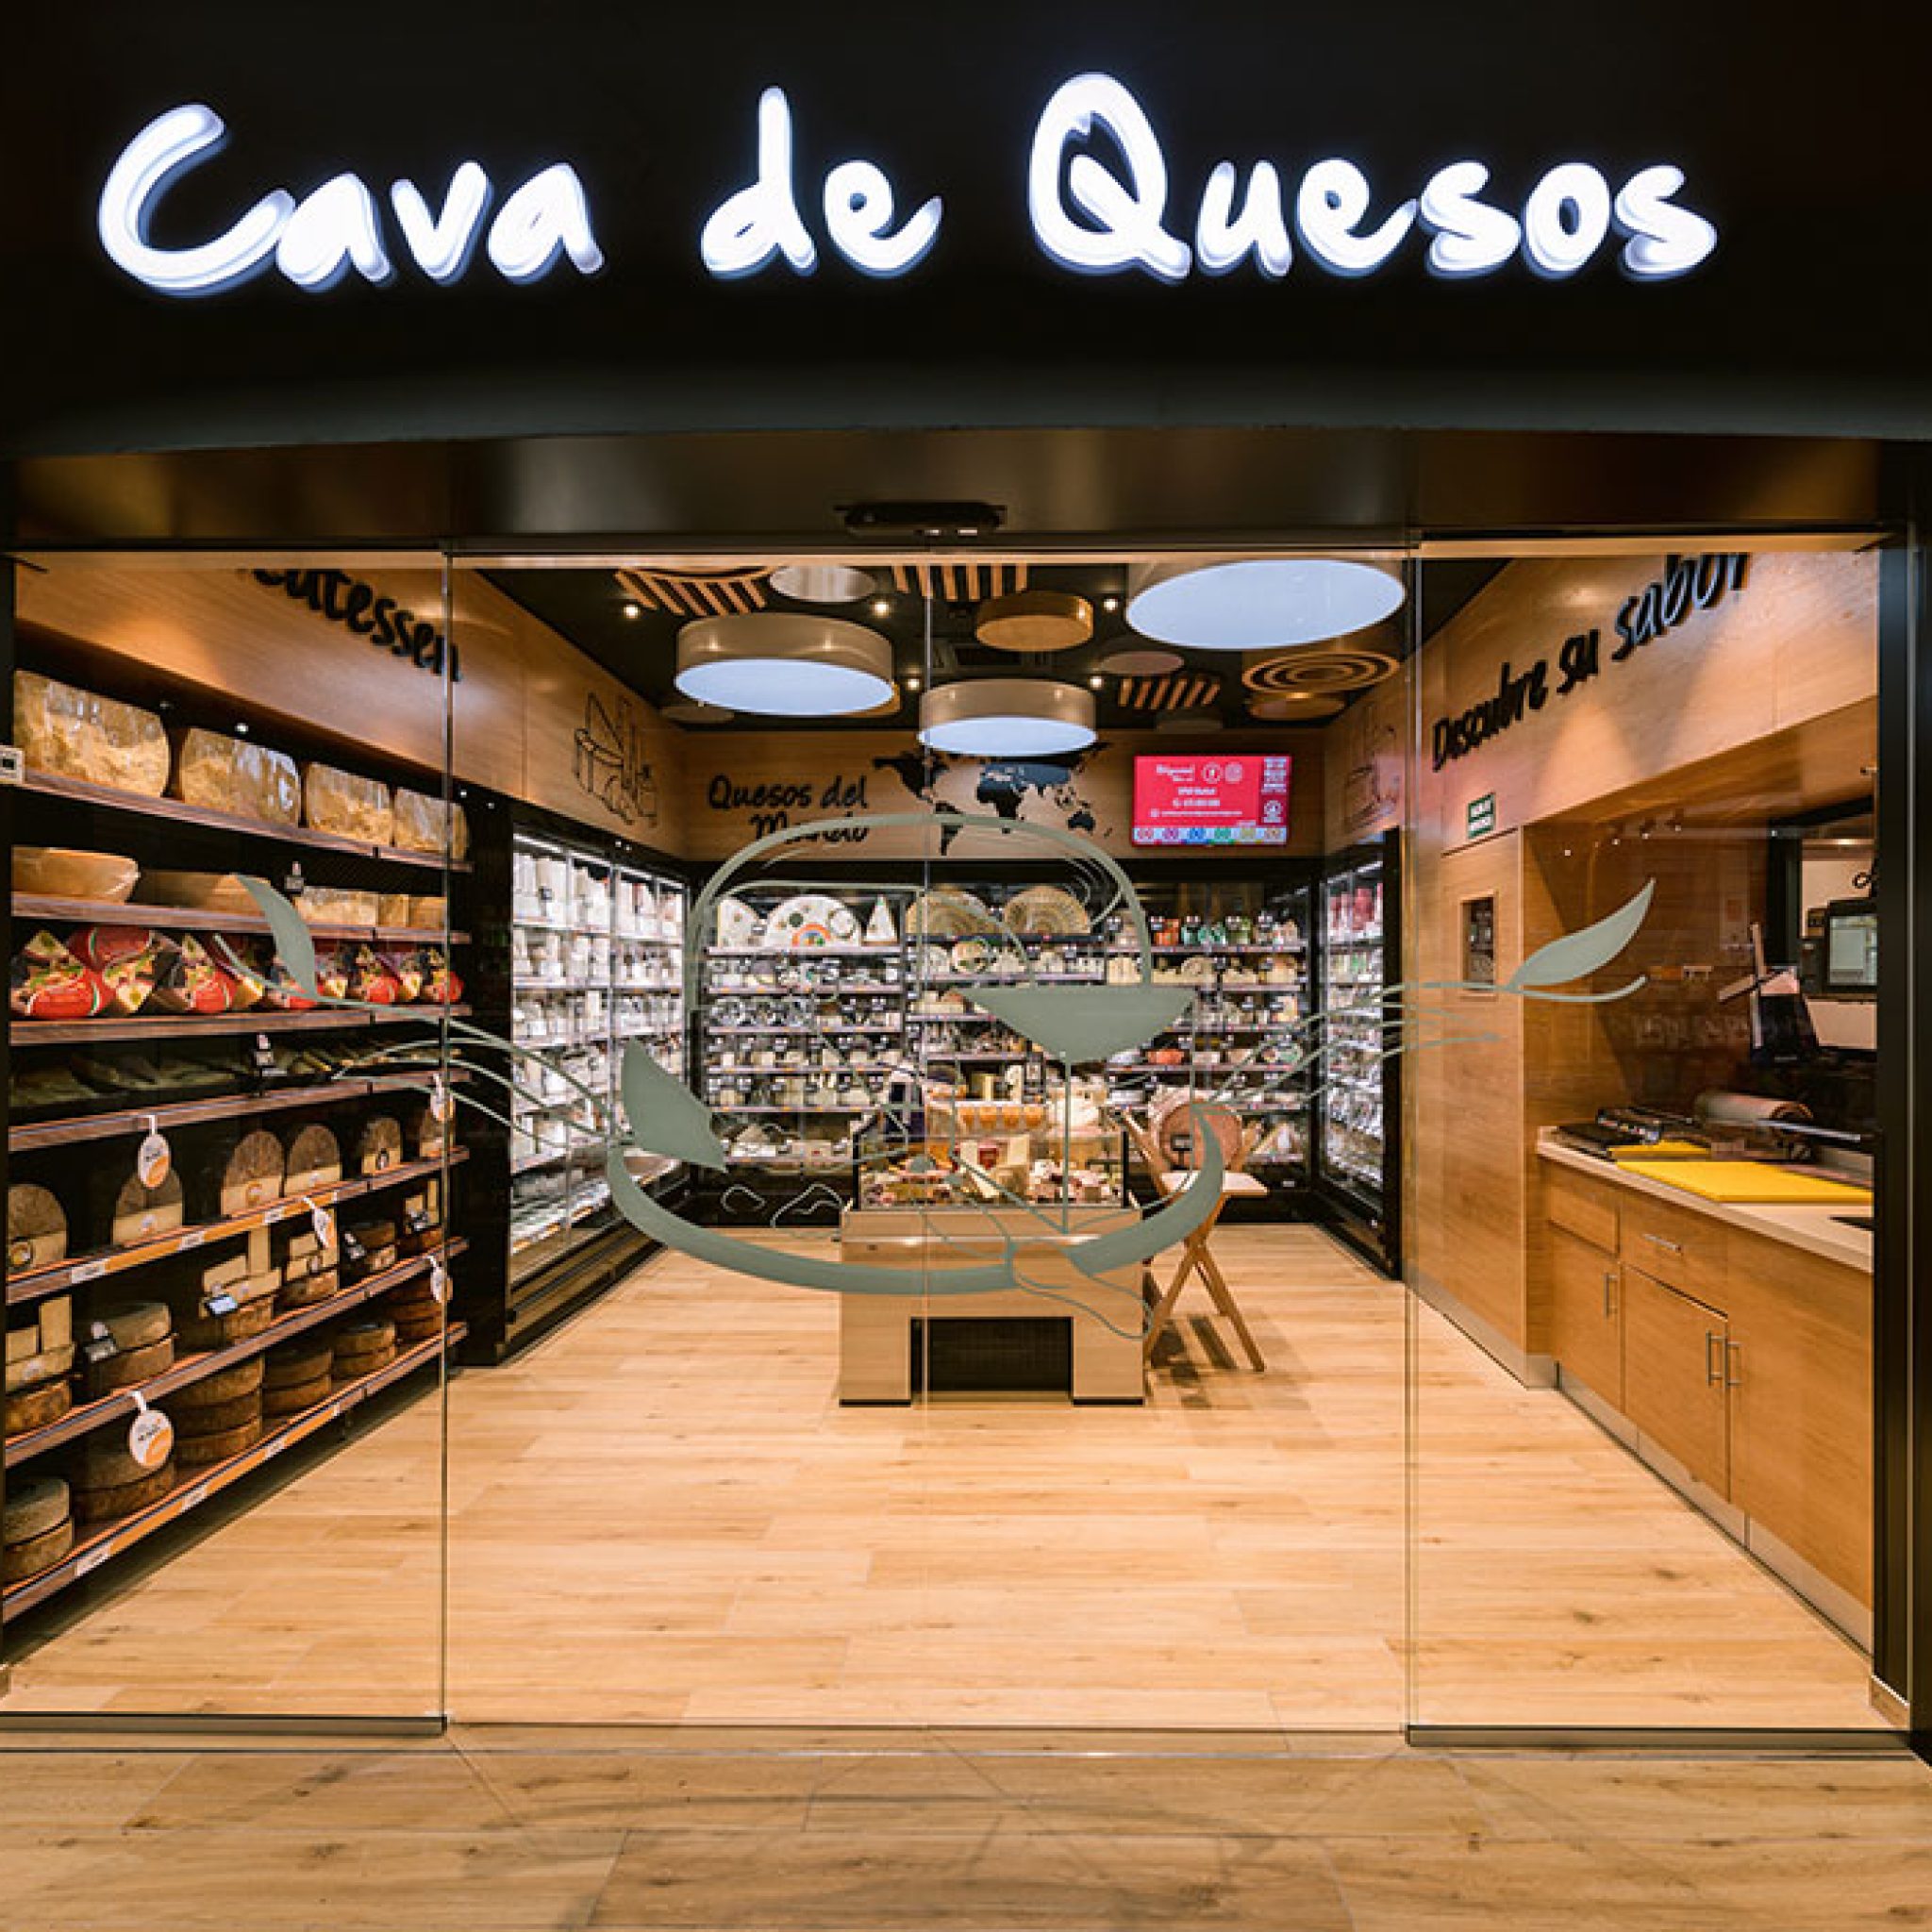 Bakers Shoe Store in Puerto Rico: An Indispensable Guide